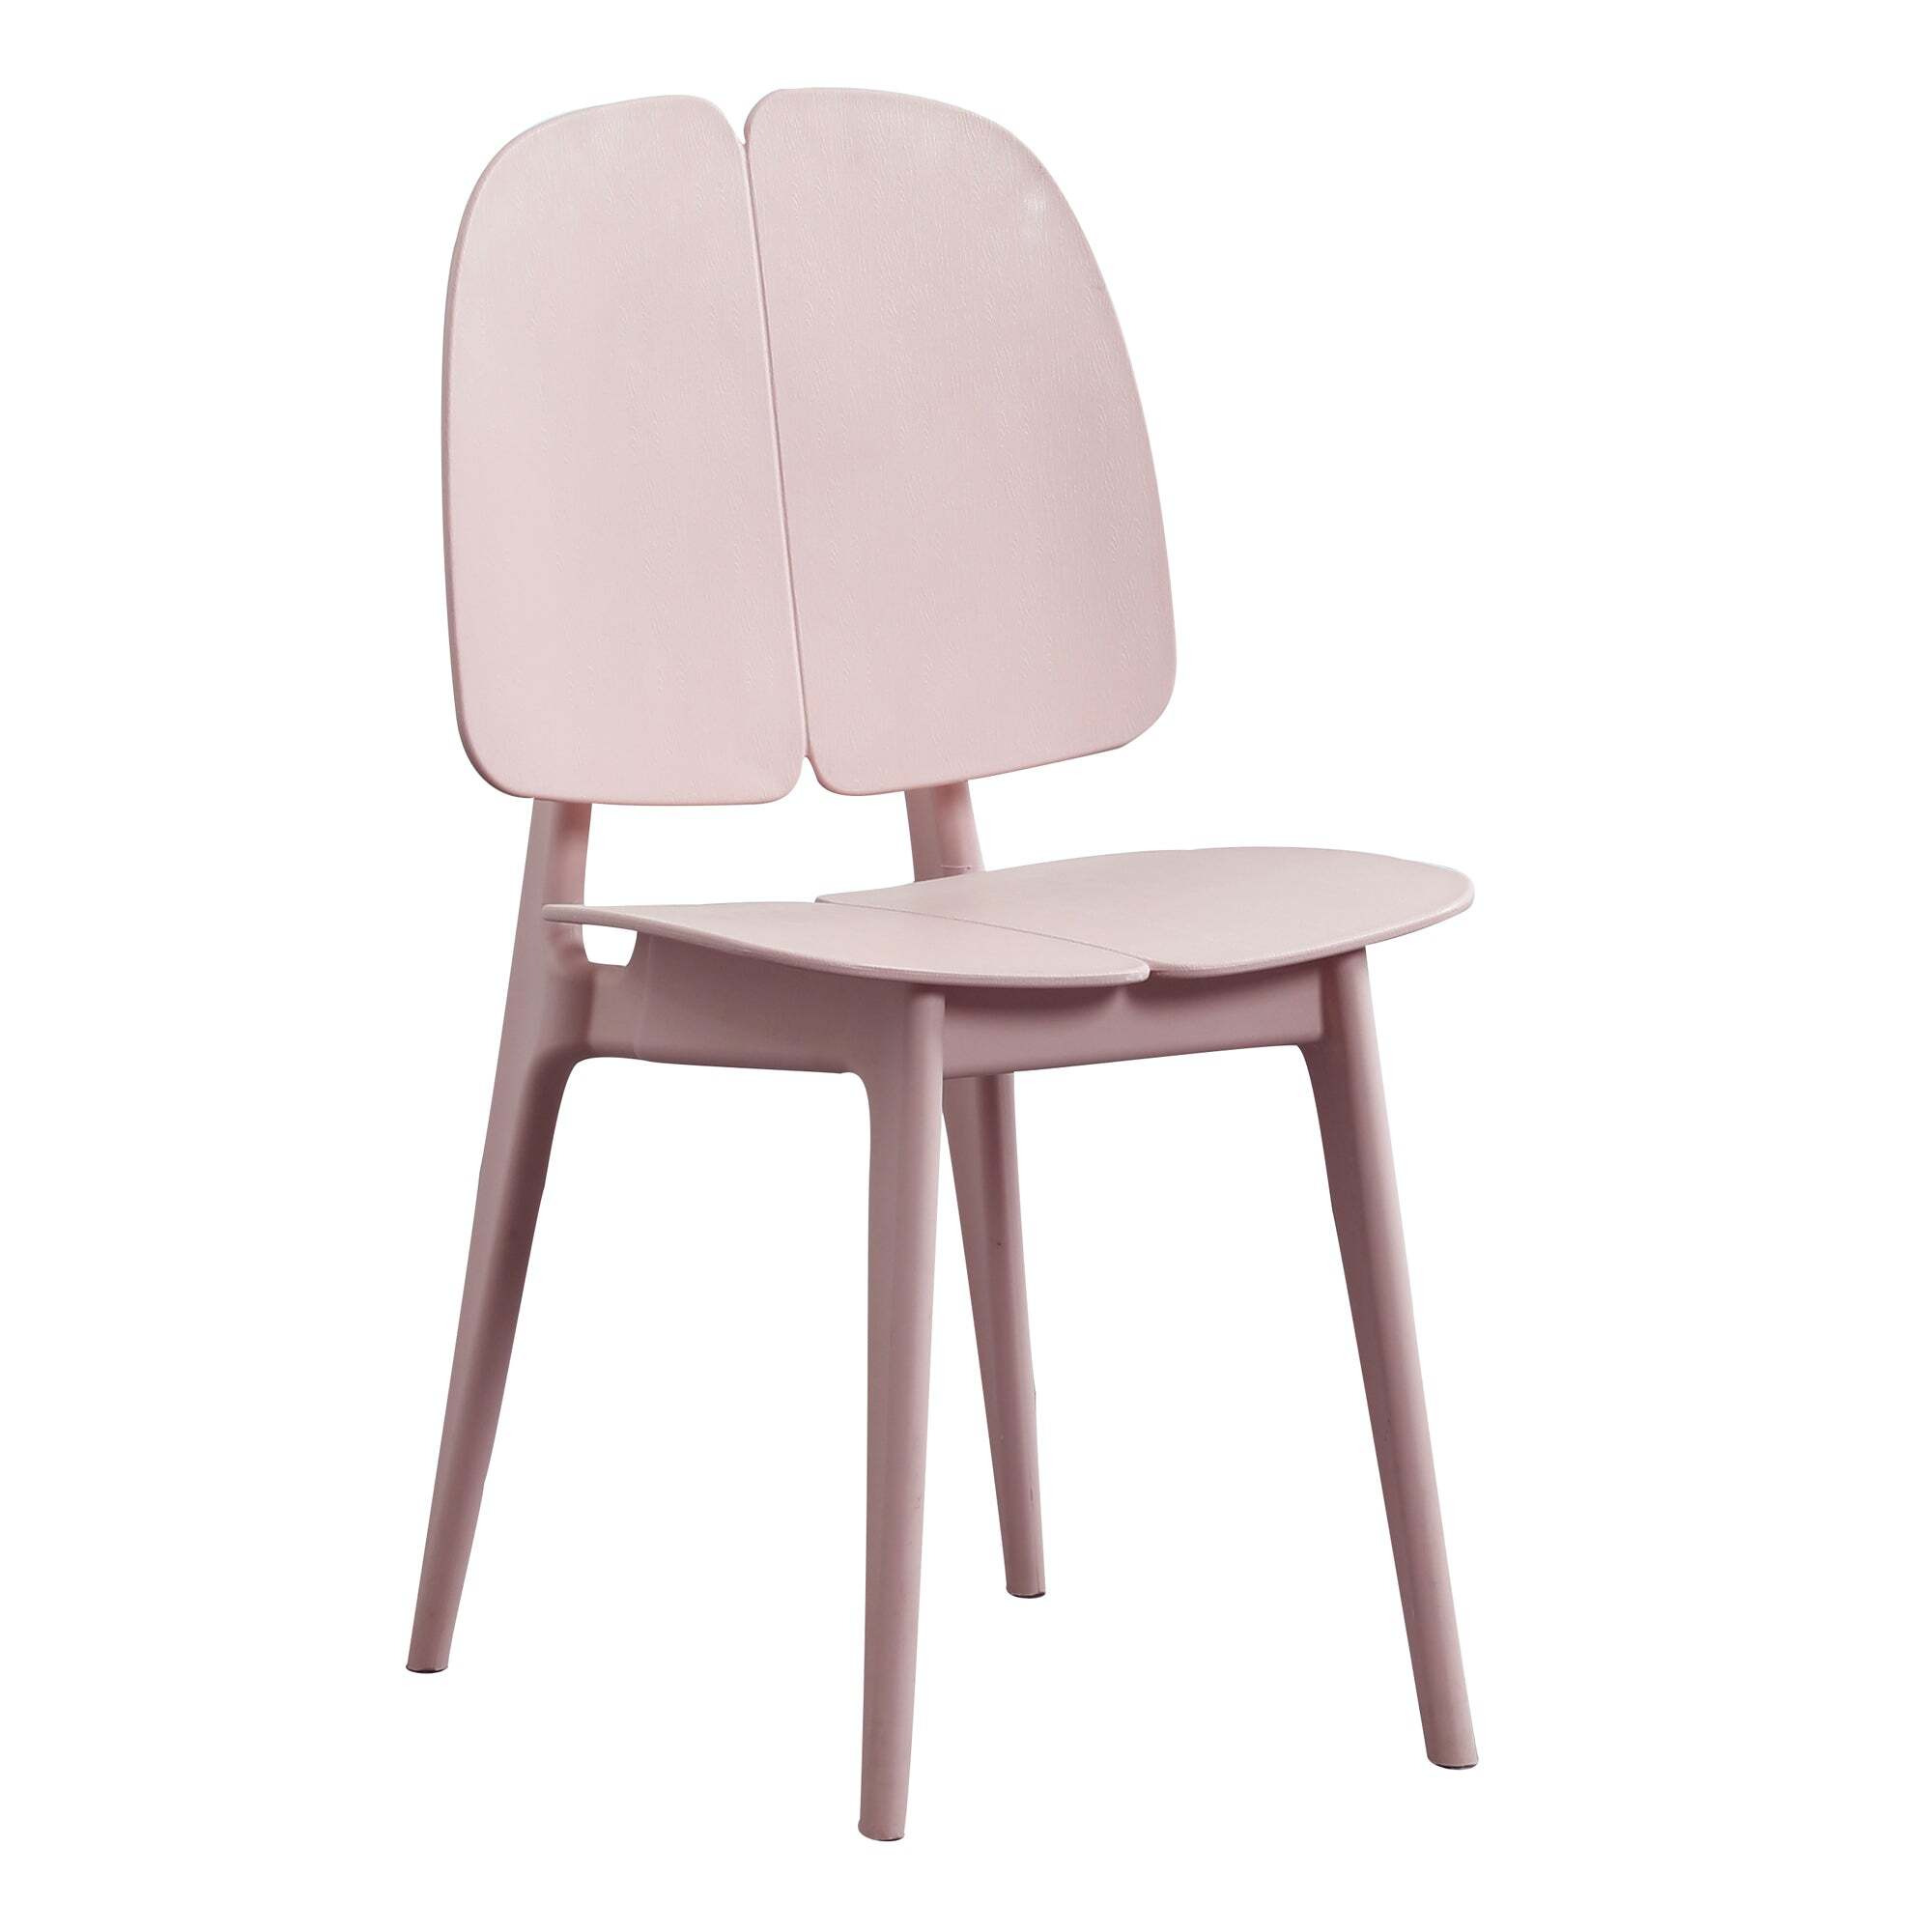 Teddy's Collection Art Dining Chair Pink - image 1